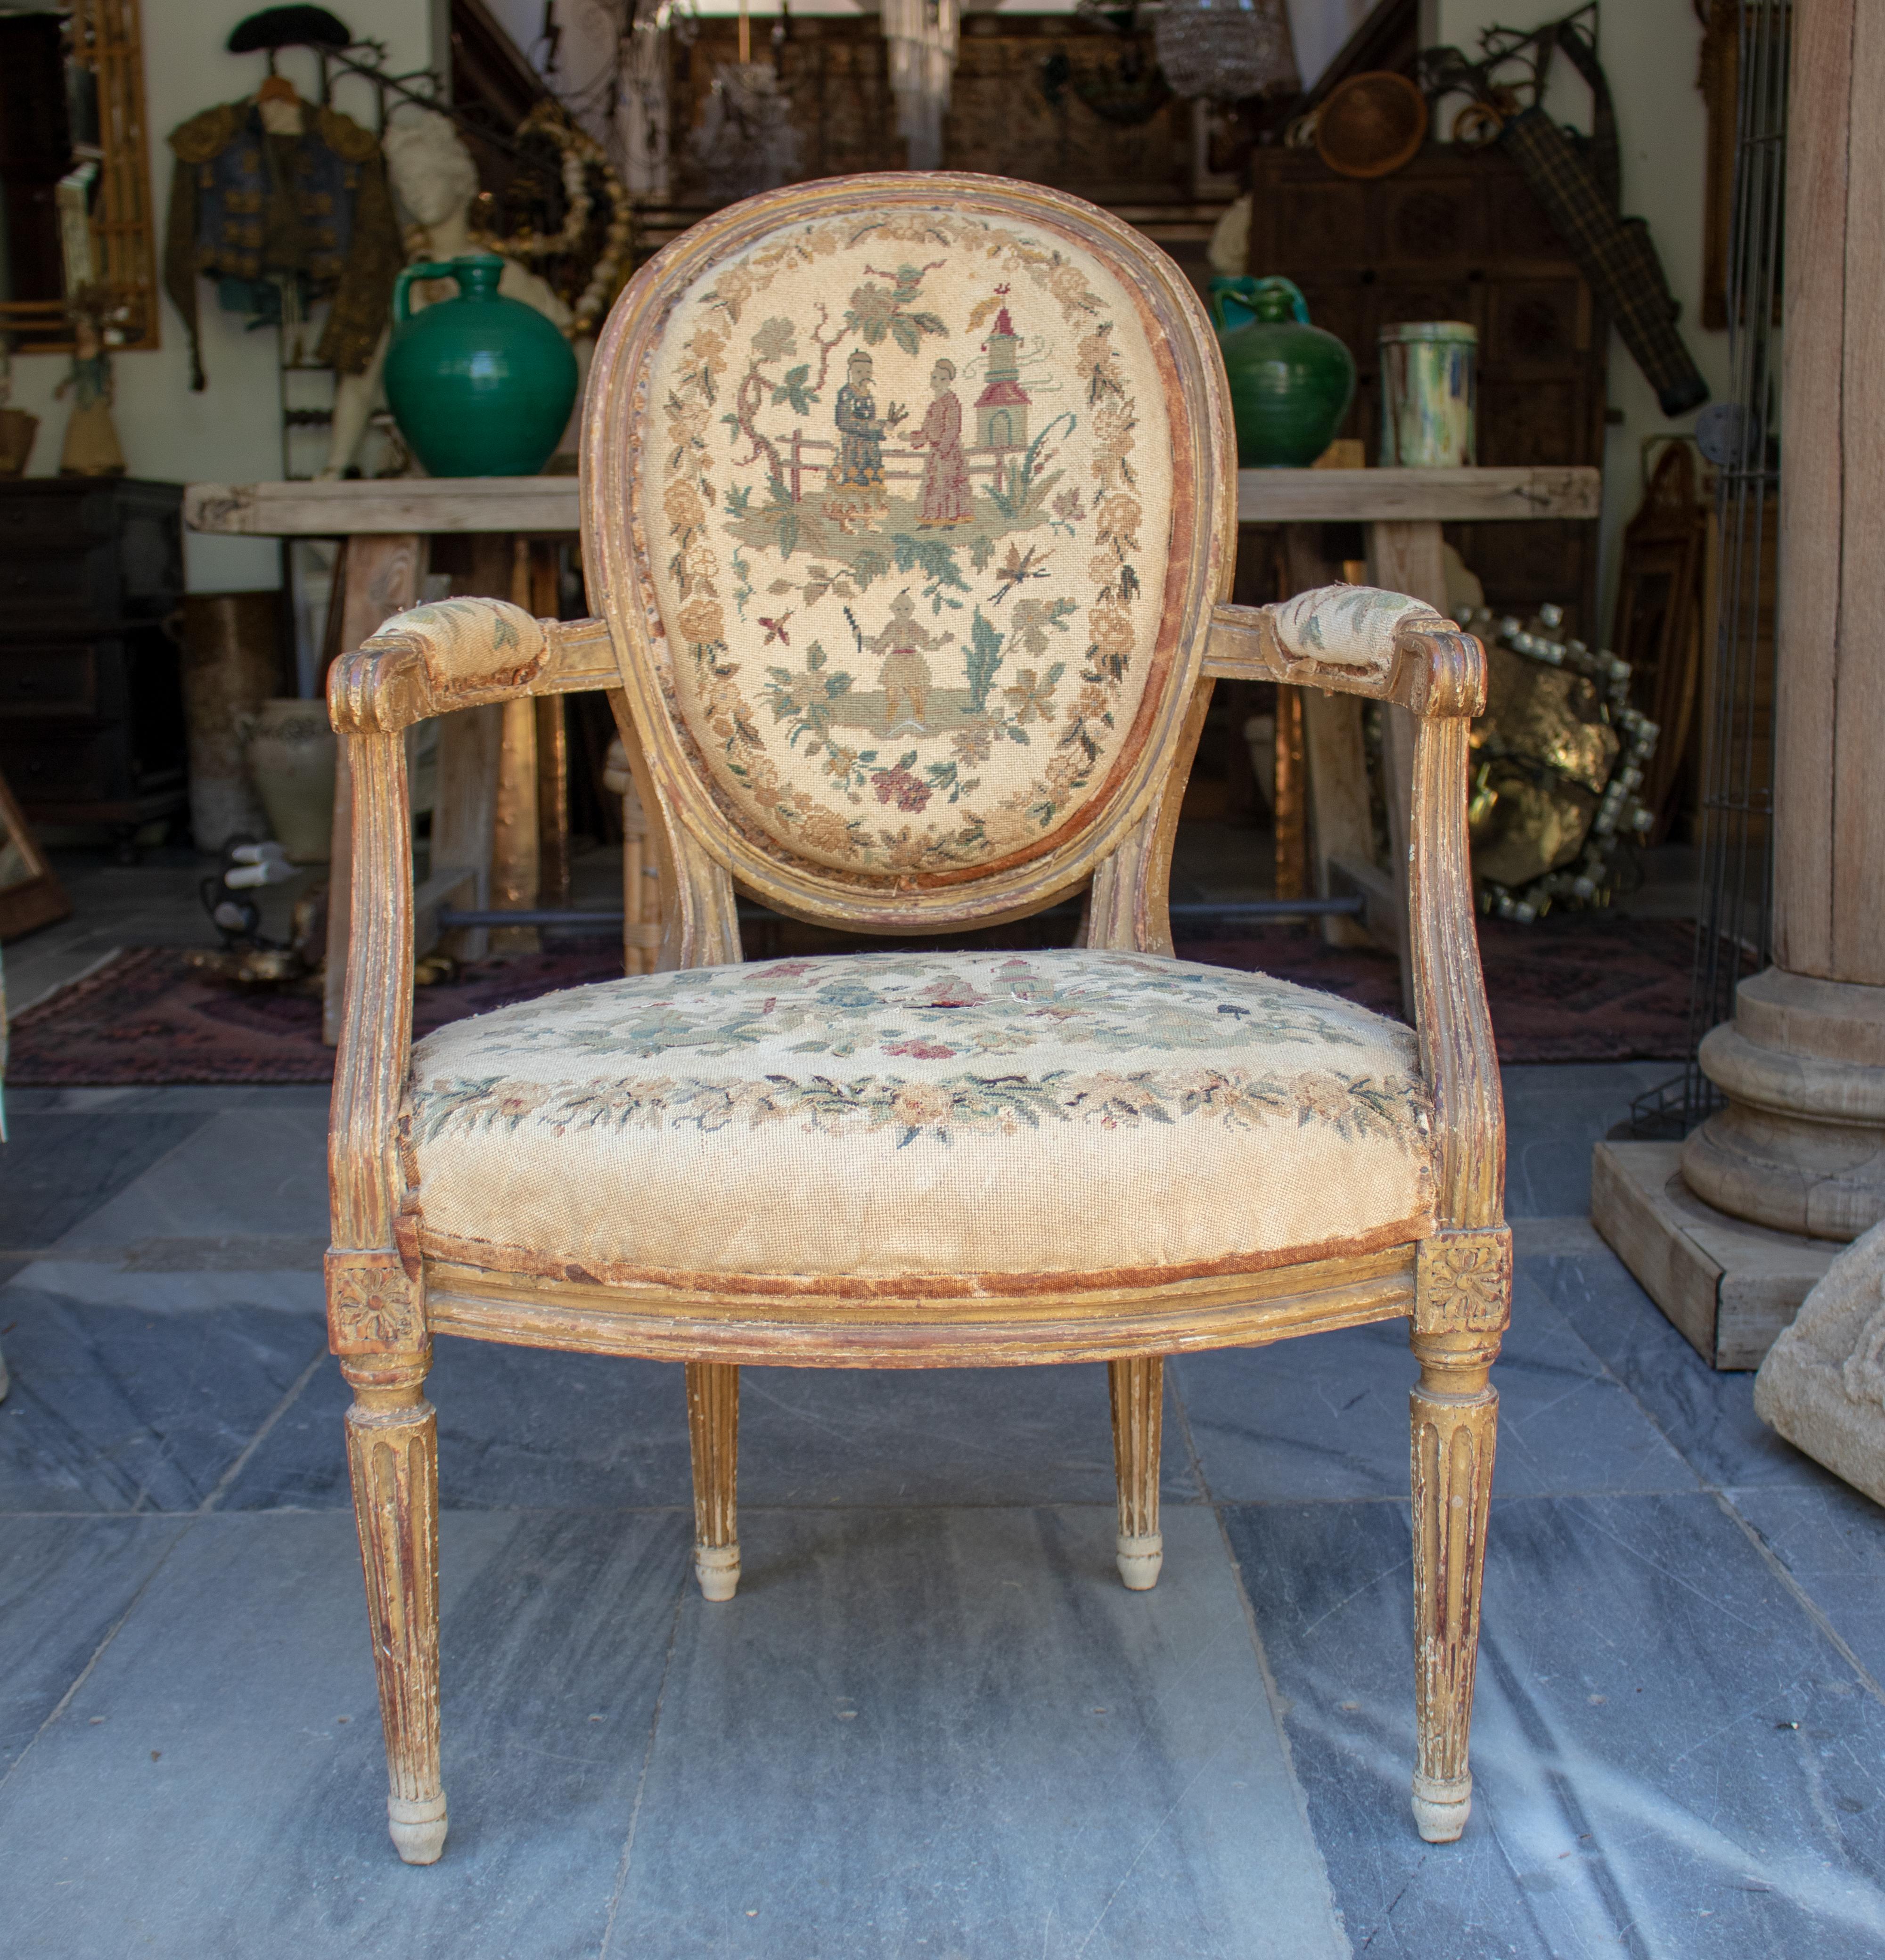 18th century French armchair upholstered with the original chinoiserie tapestry.